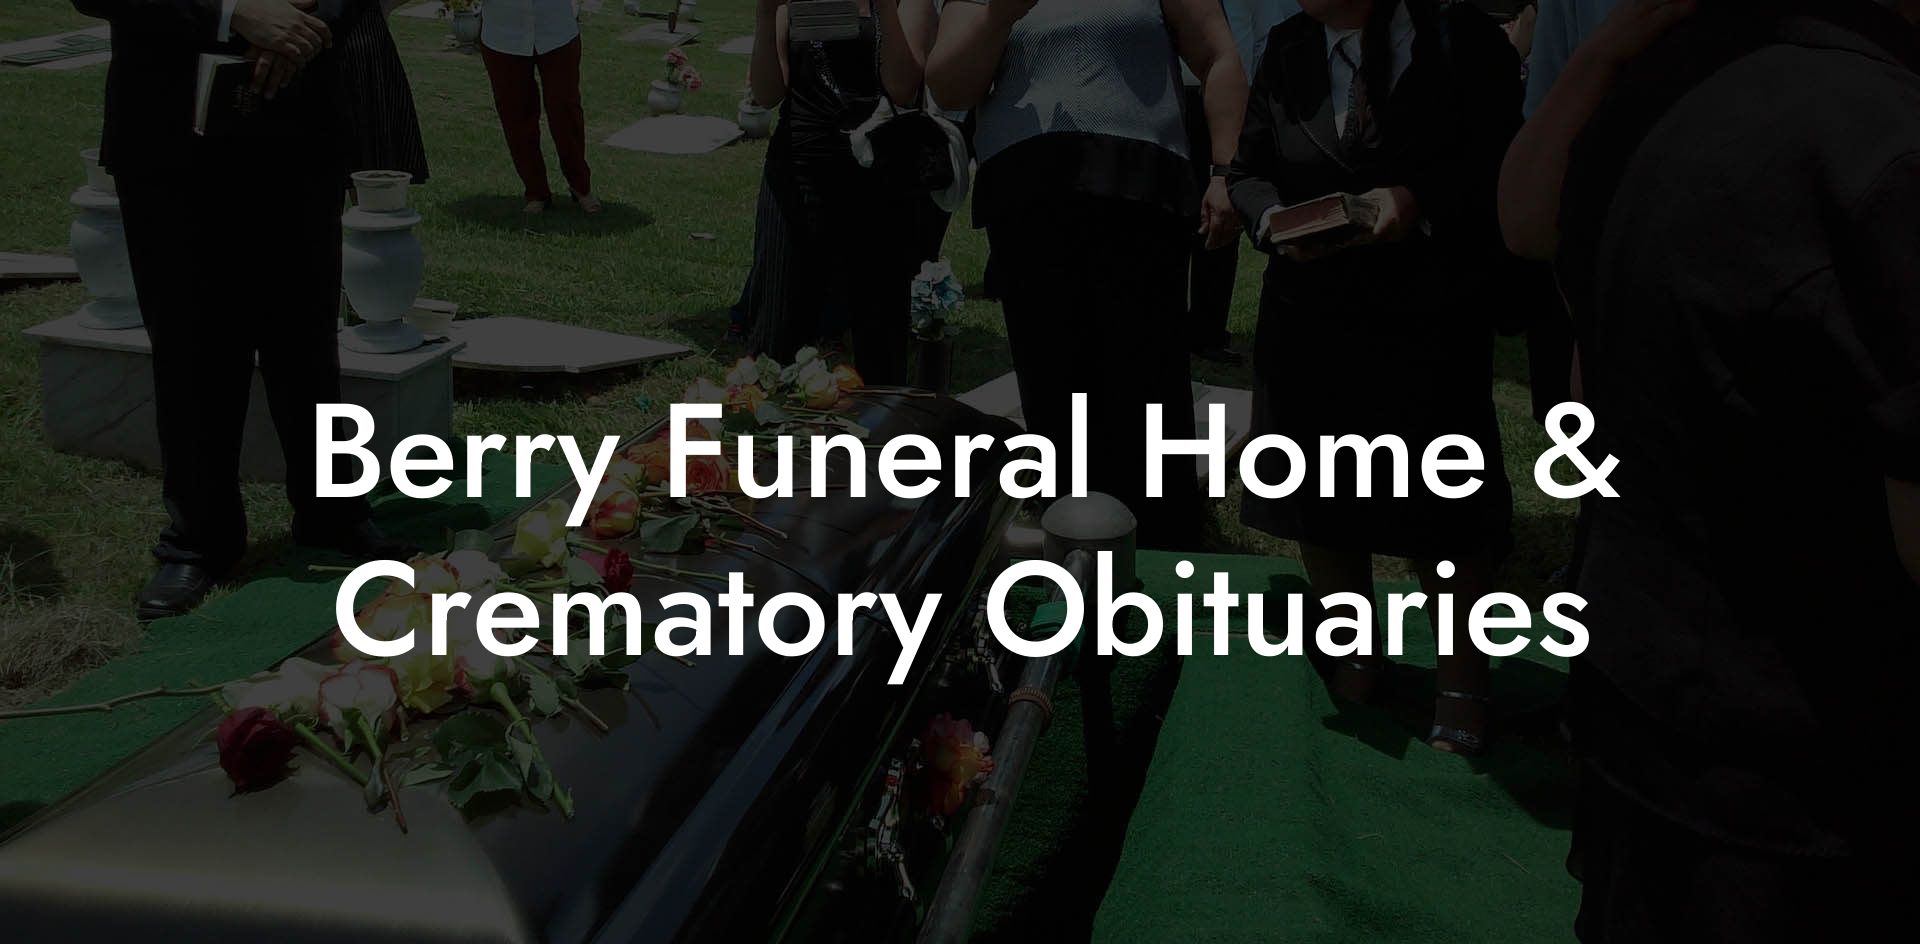 Berry Funeral Home & Crematory Obituaries